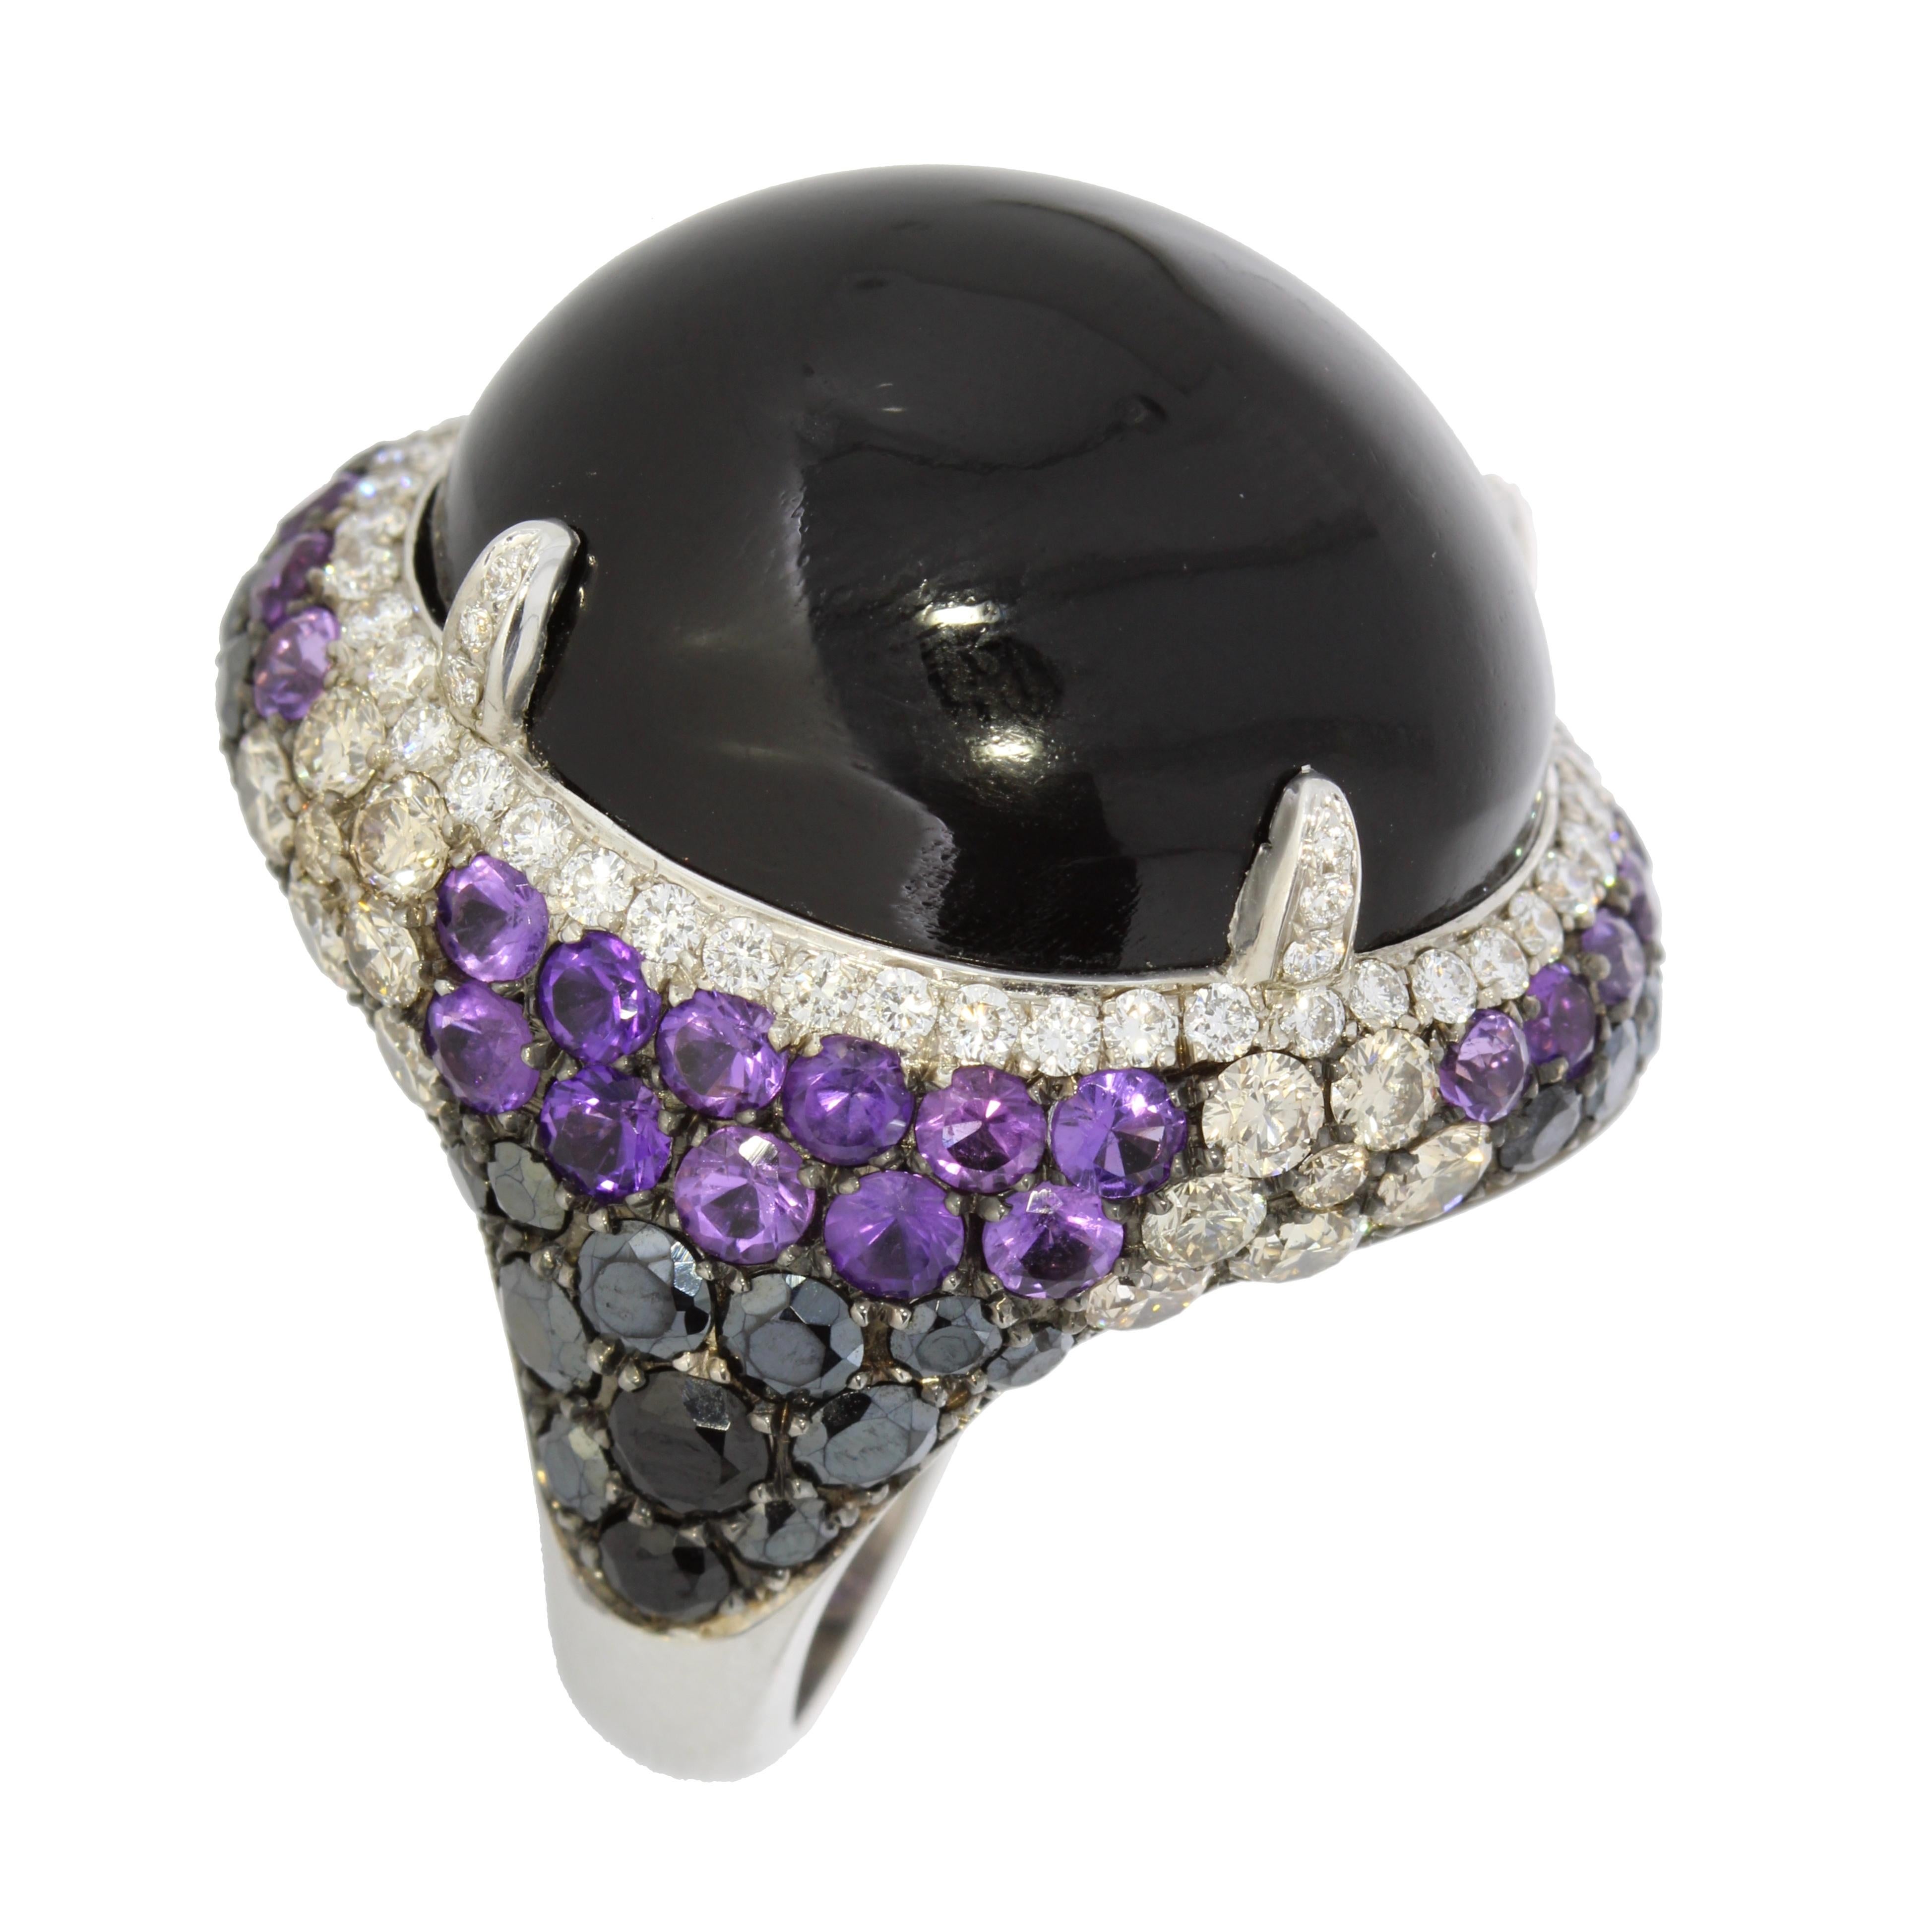 Evocative of the Carnival of Venice a daring black onyx cabochon surrounded by amethysts, black spinels and sparkling brown and white brilliant cut diamonds, form a majestic silhouette.

Details
Cabochon Onyx and Diamonds Cocktail Ring
- 18 karat